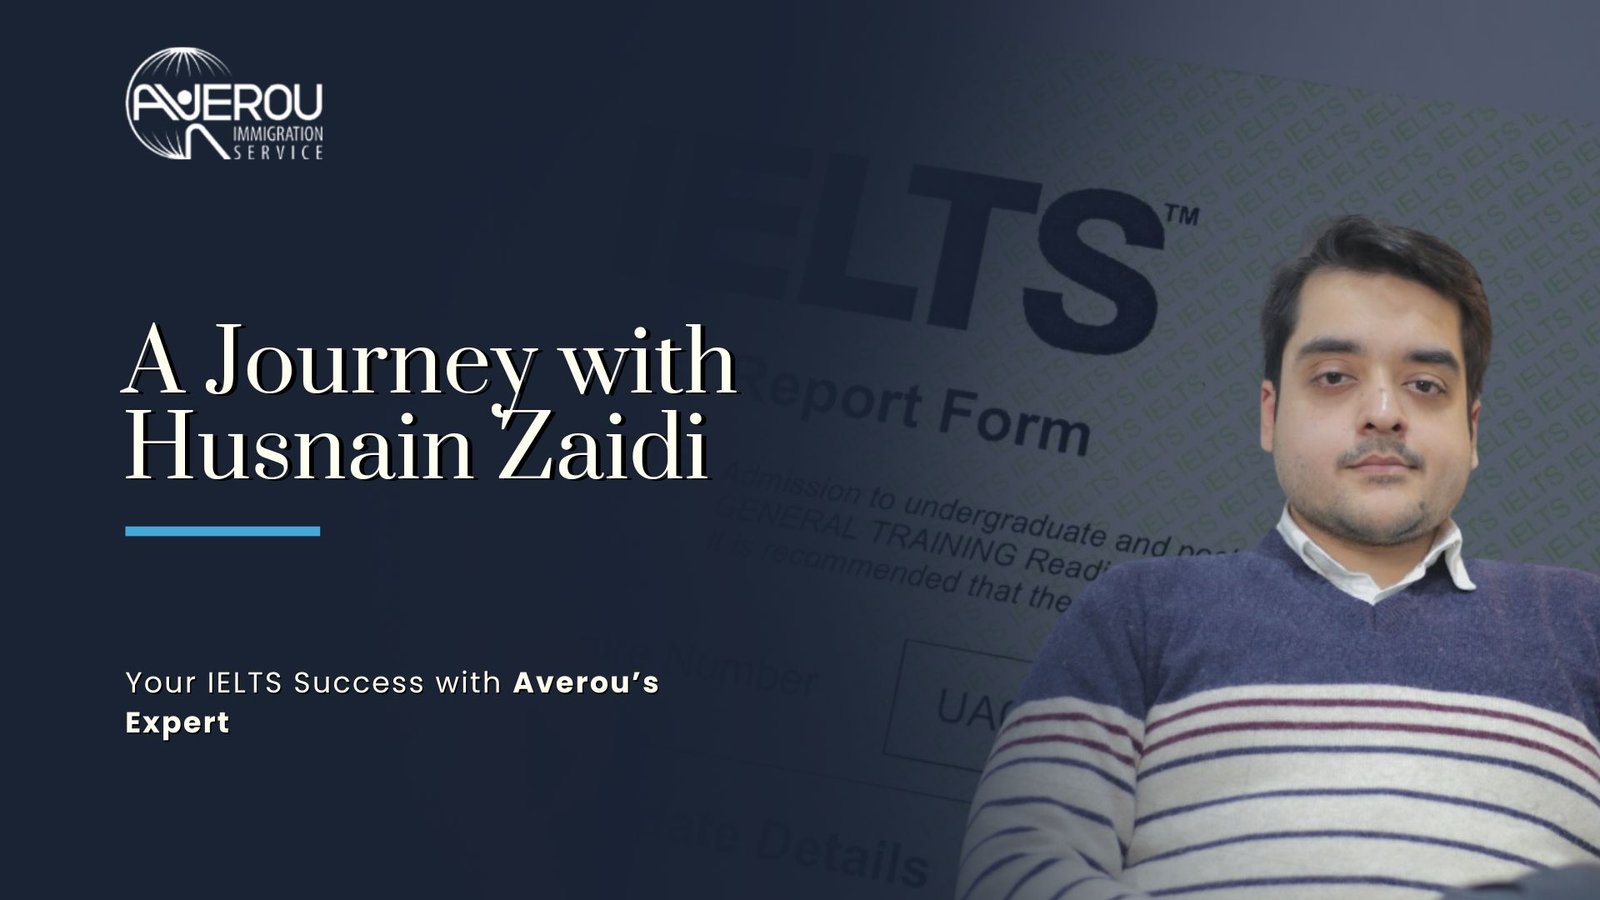 Your IELTS Success with Averou’s Expert: A Journey with Husnain Zaidi